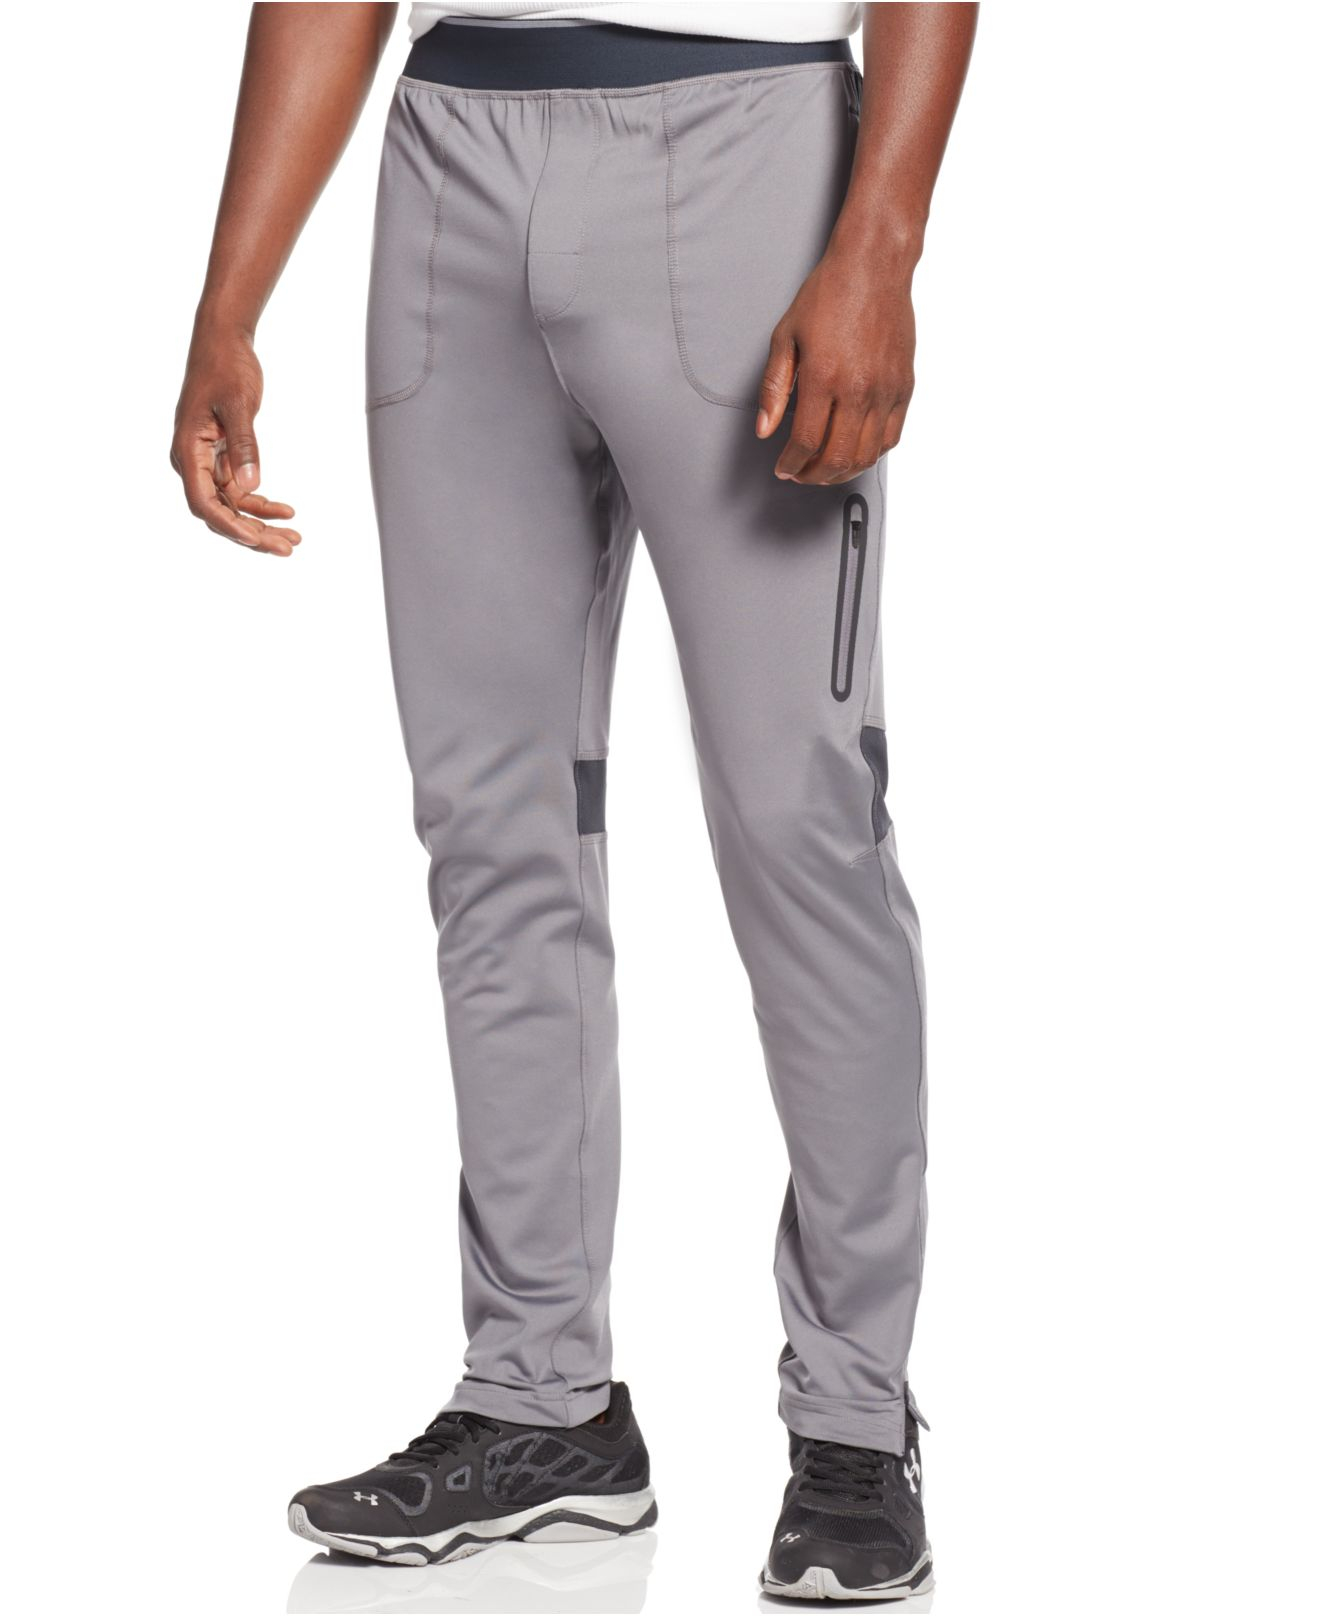 Lyst - Under Armour X-alt Tapered Knit Pants in Gray for Men